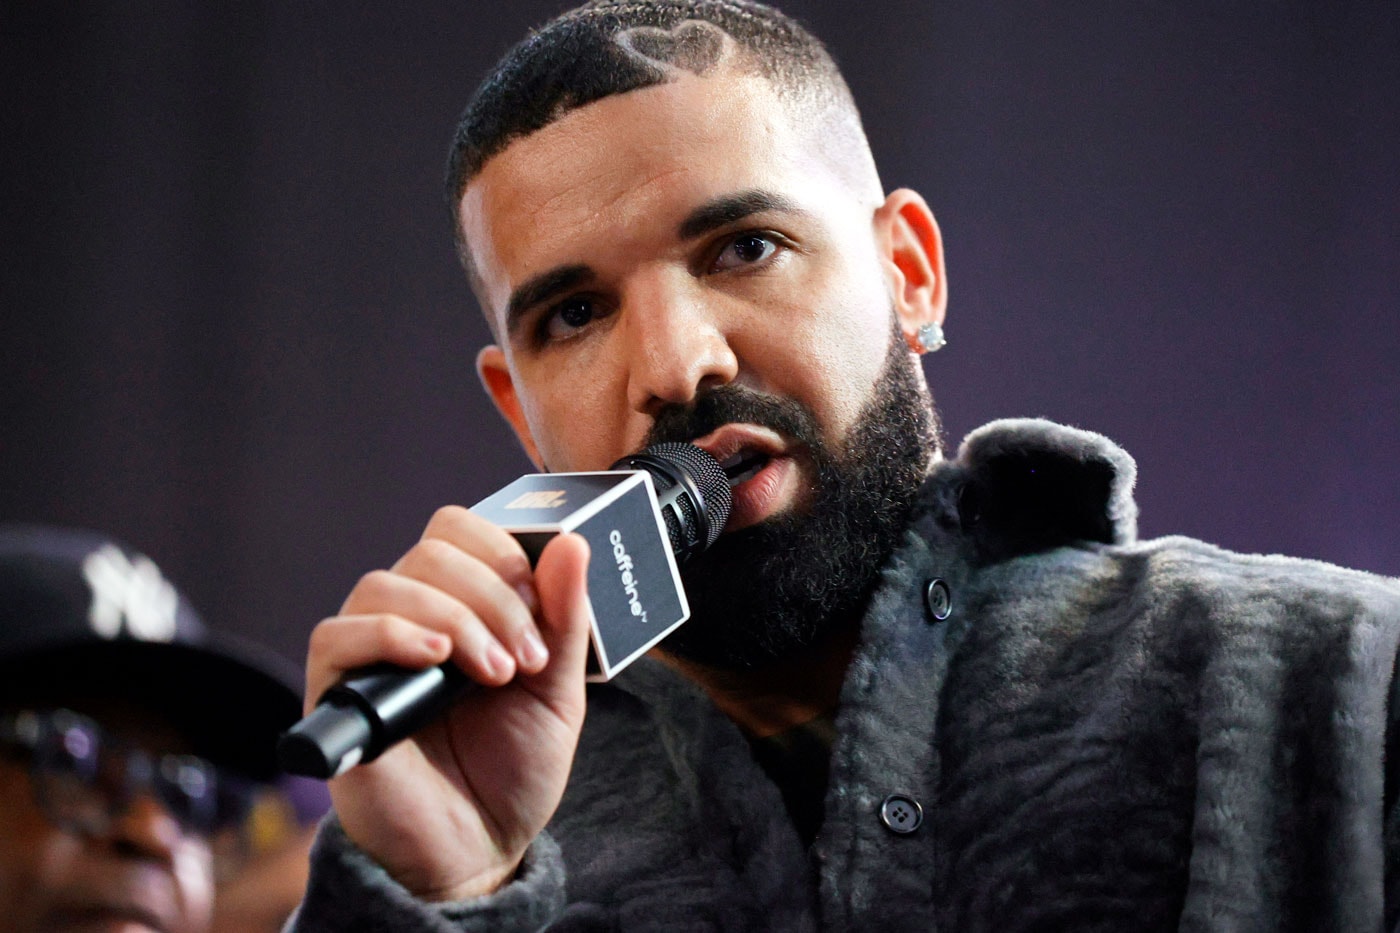 Someone Stole $2-3 Million of Jewelry from Drake's Tourbus